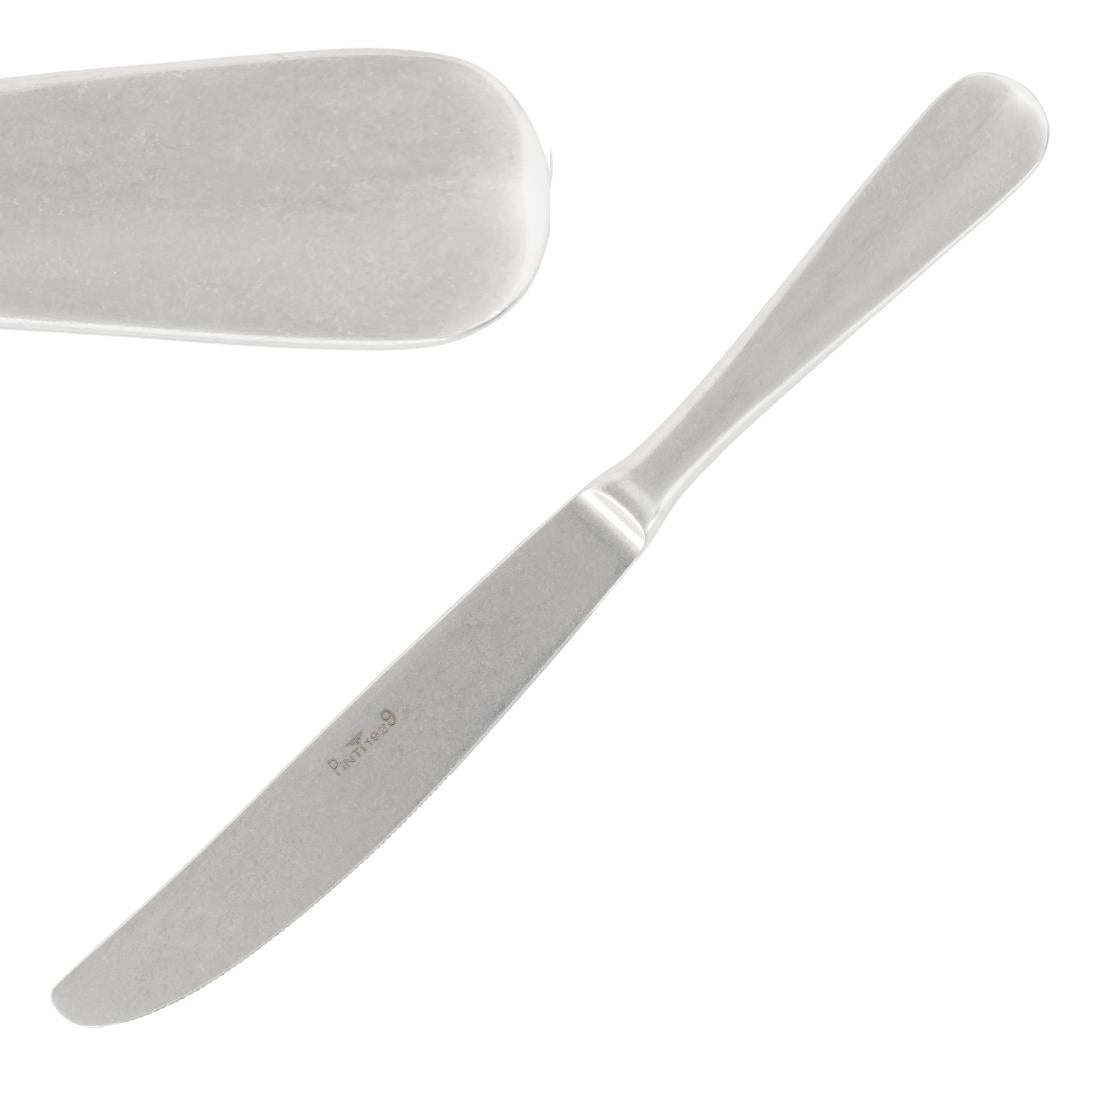 Pintinox Baguette Stonewashed Table Knife (Pack of 12)